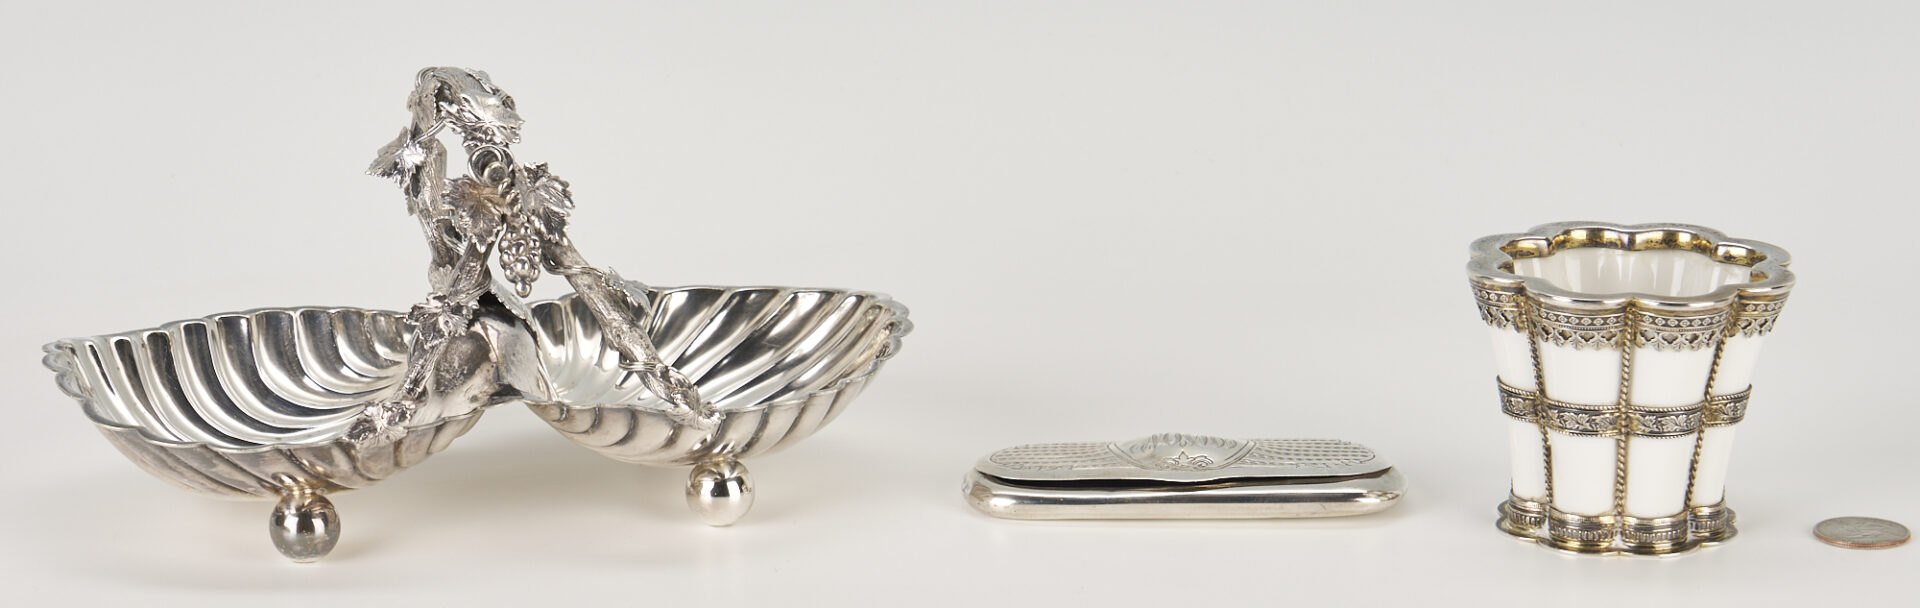 Lot 802: 3 Silver Items: Eyeglass Case, Cup & Shell Dish